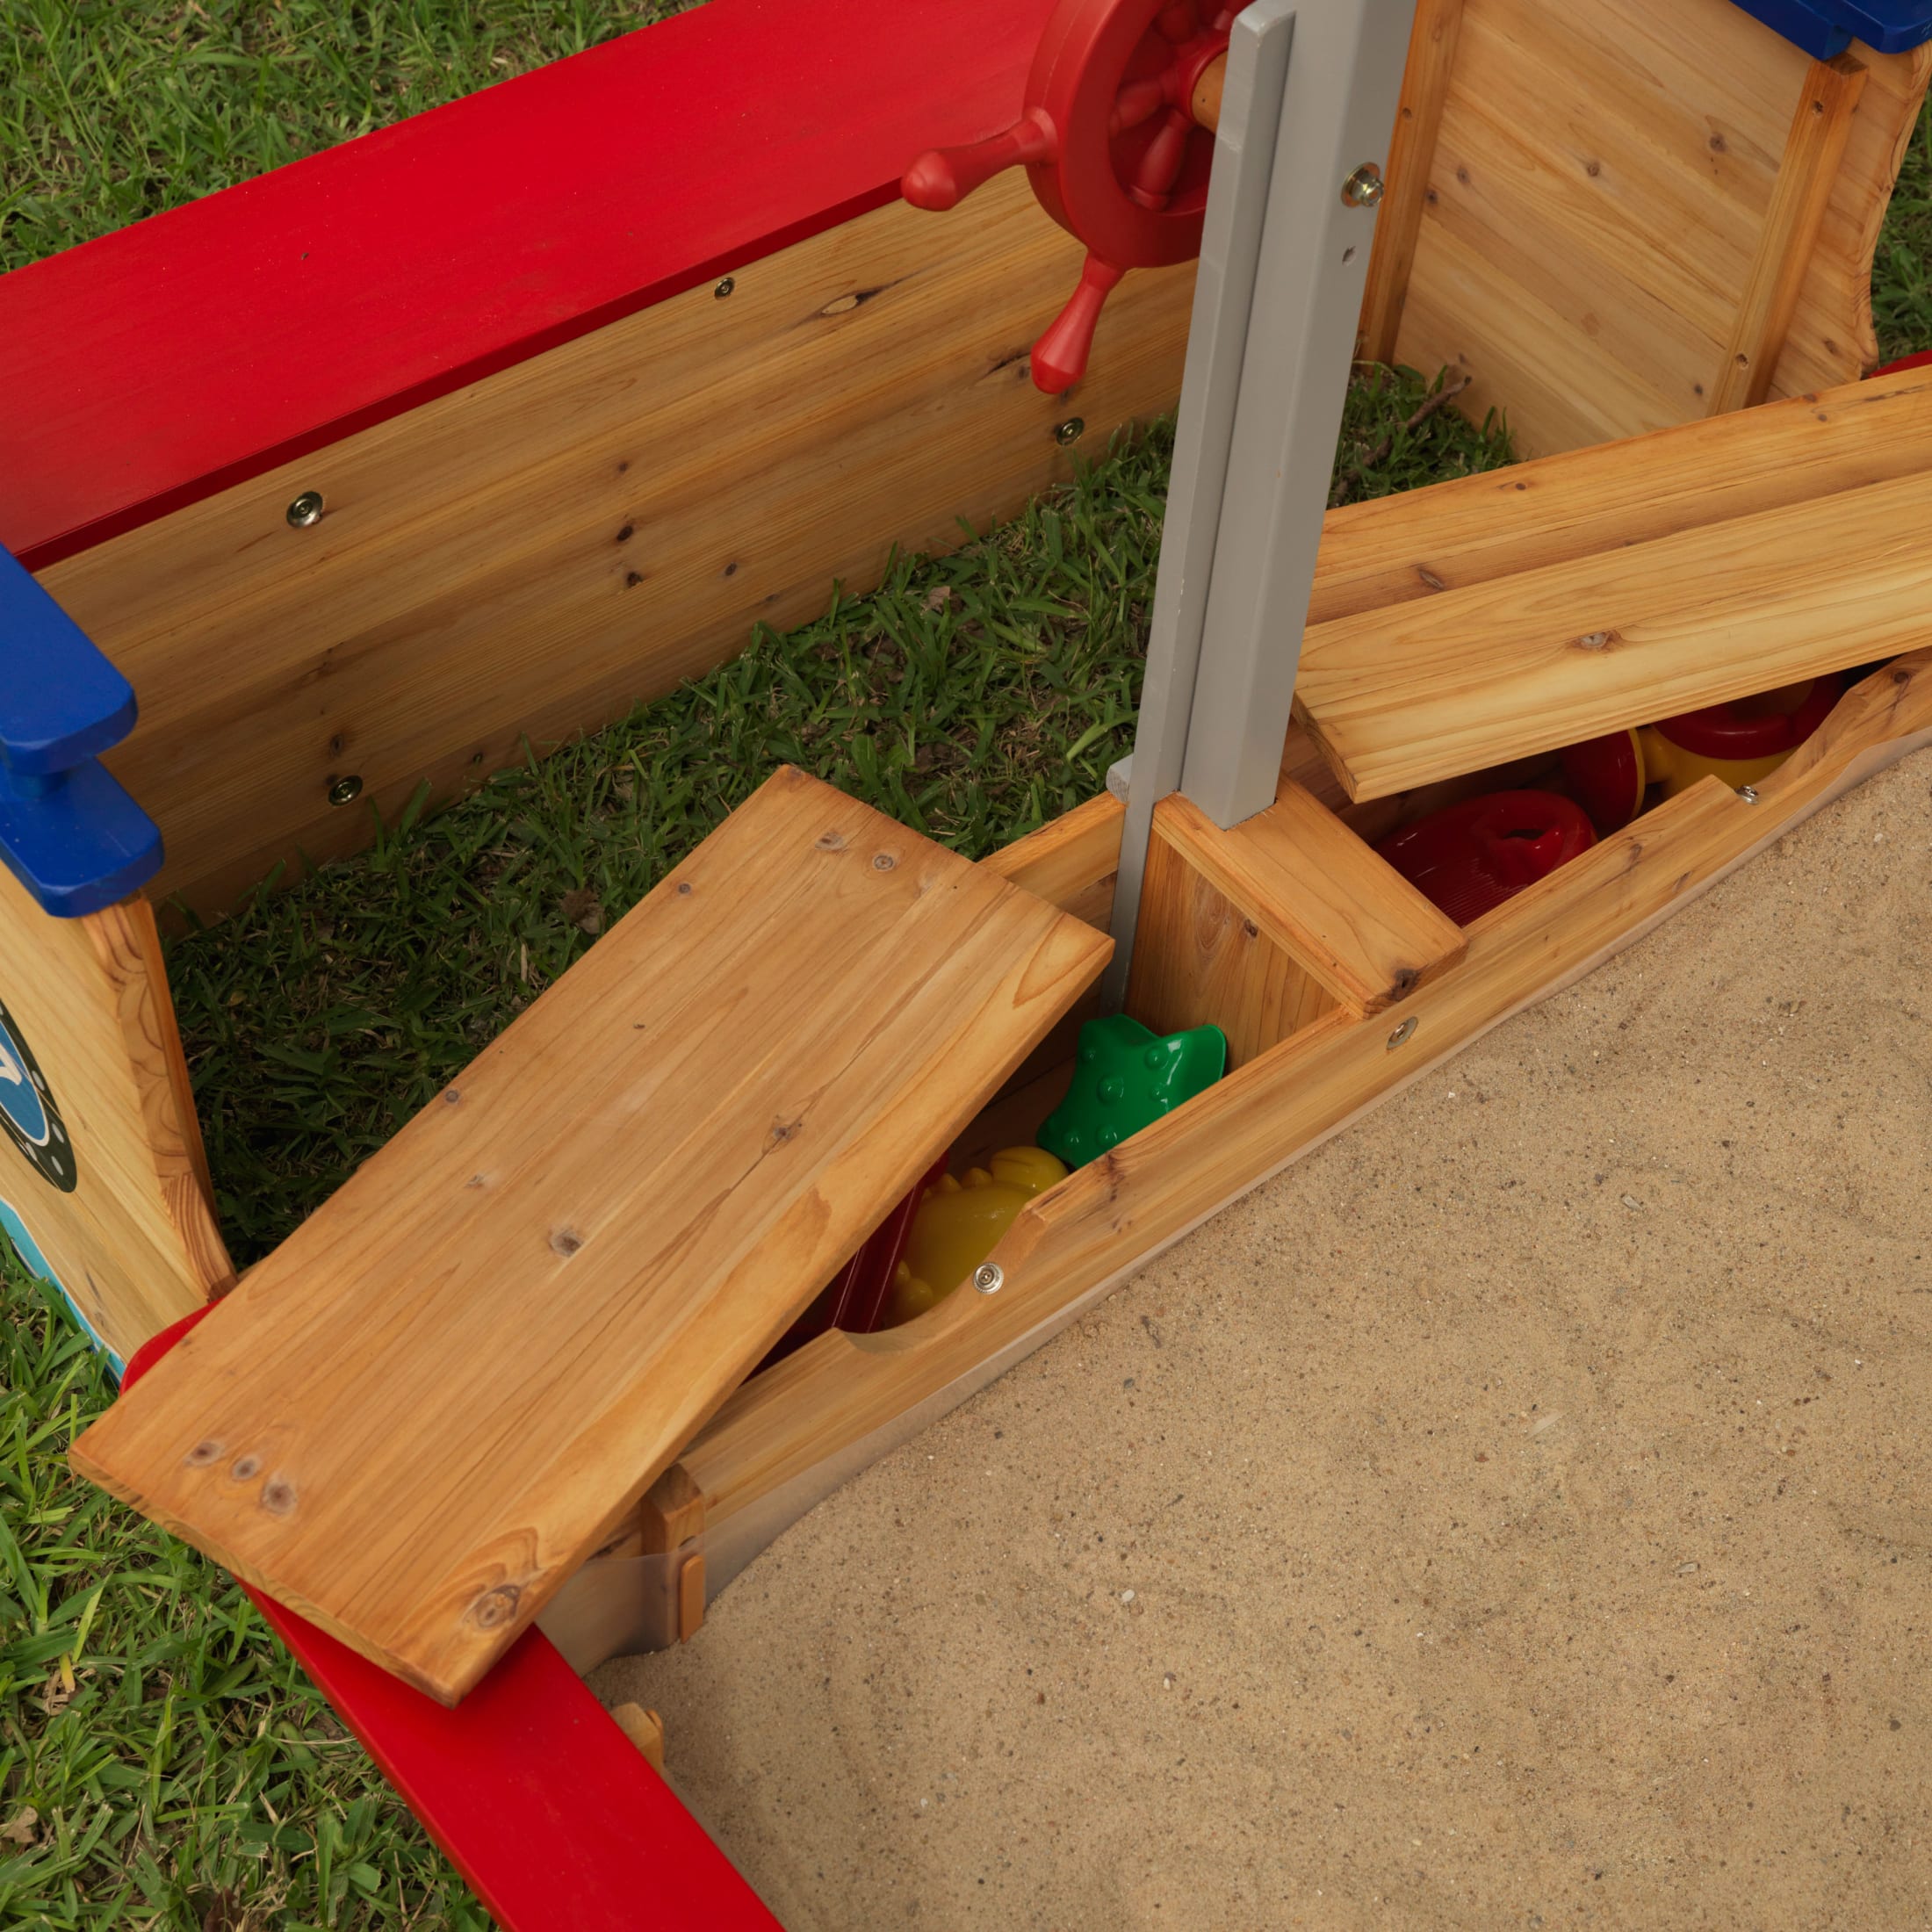 KidKraft Wooden Pirate Sandbox with Canopy, Covered Kid's Sandbox, Blue & Red - image 3 of 5